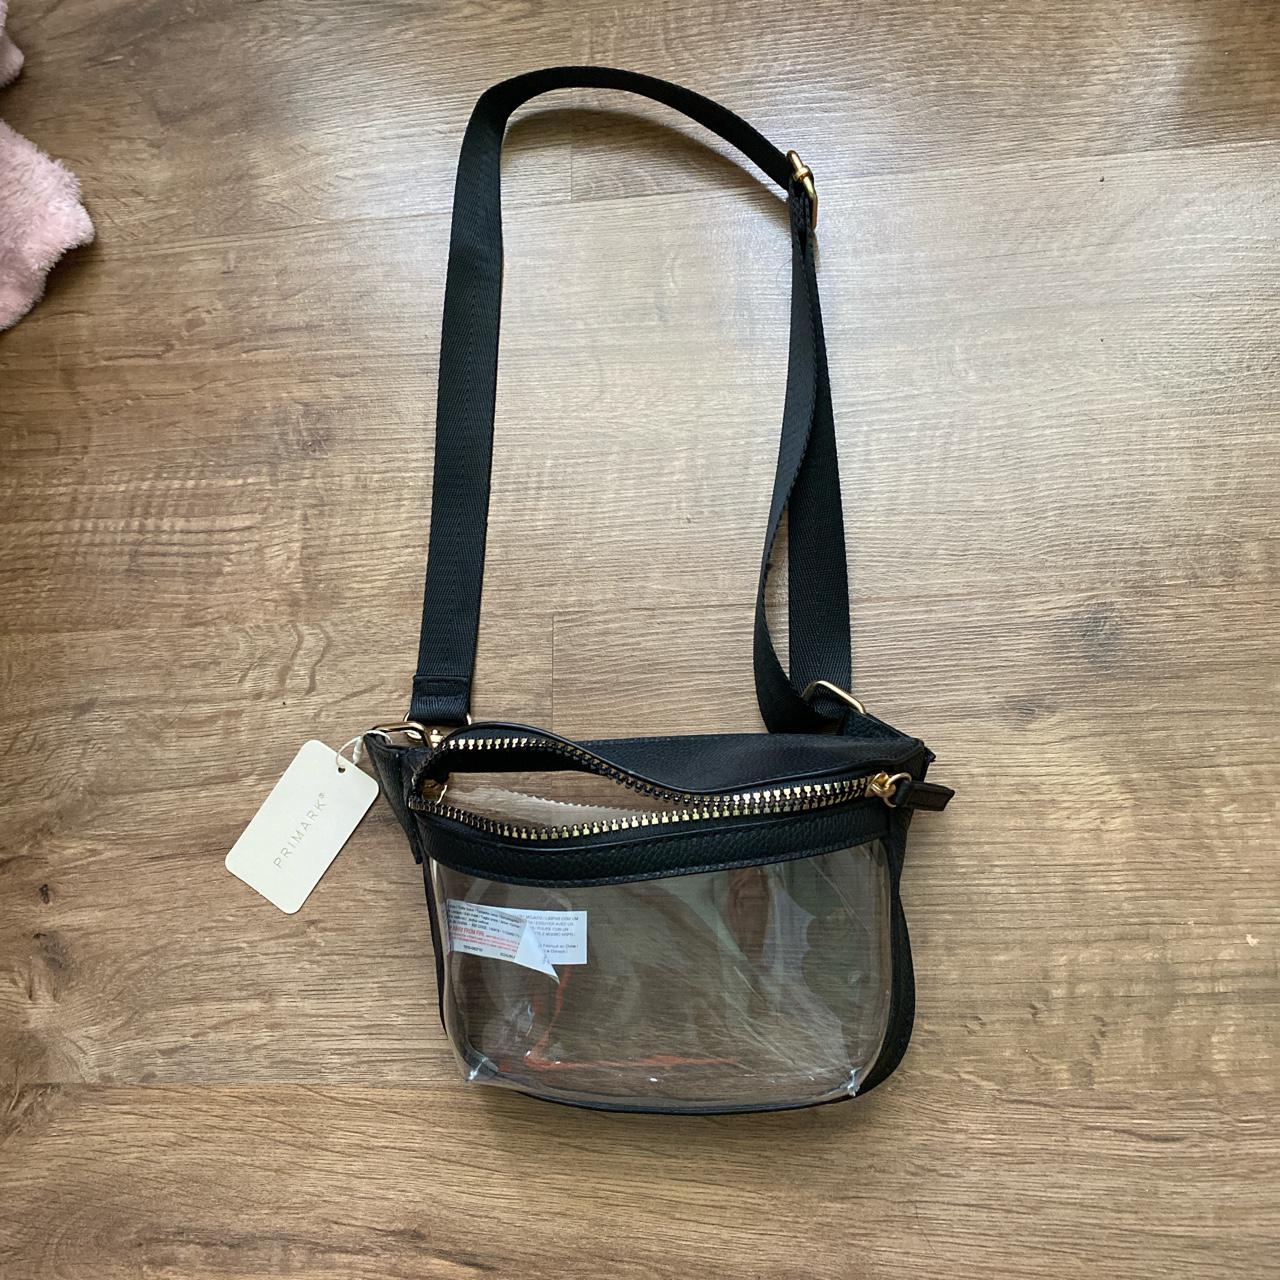 Product Image 1 - Primary clear fanny pack/travel bum